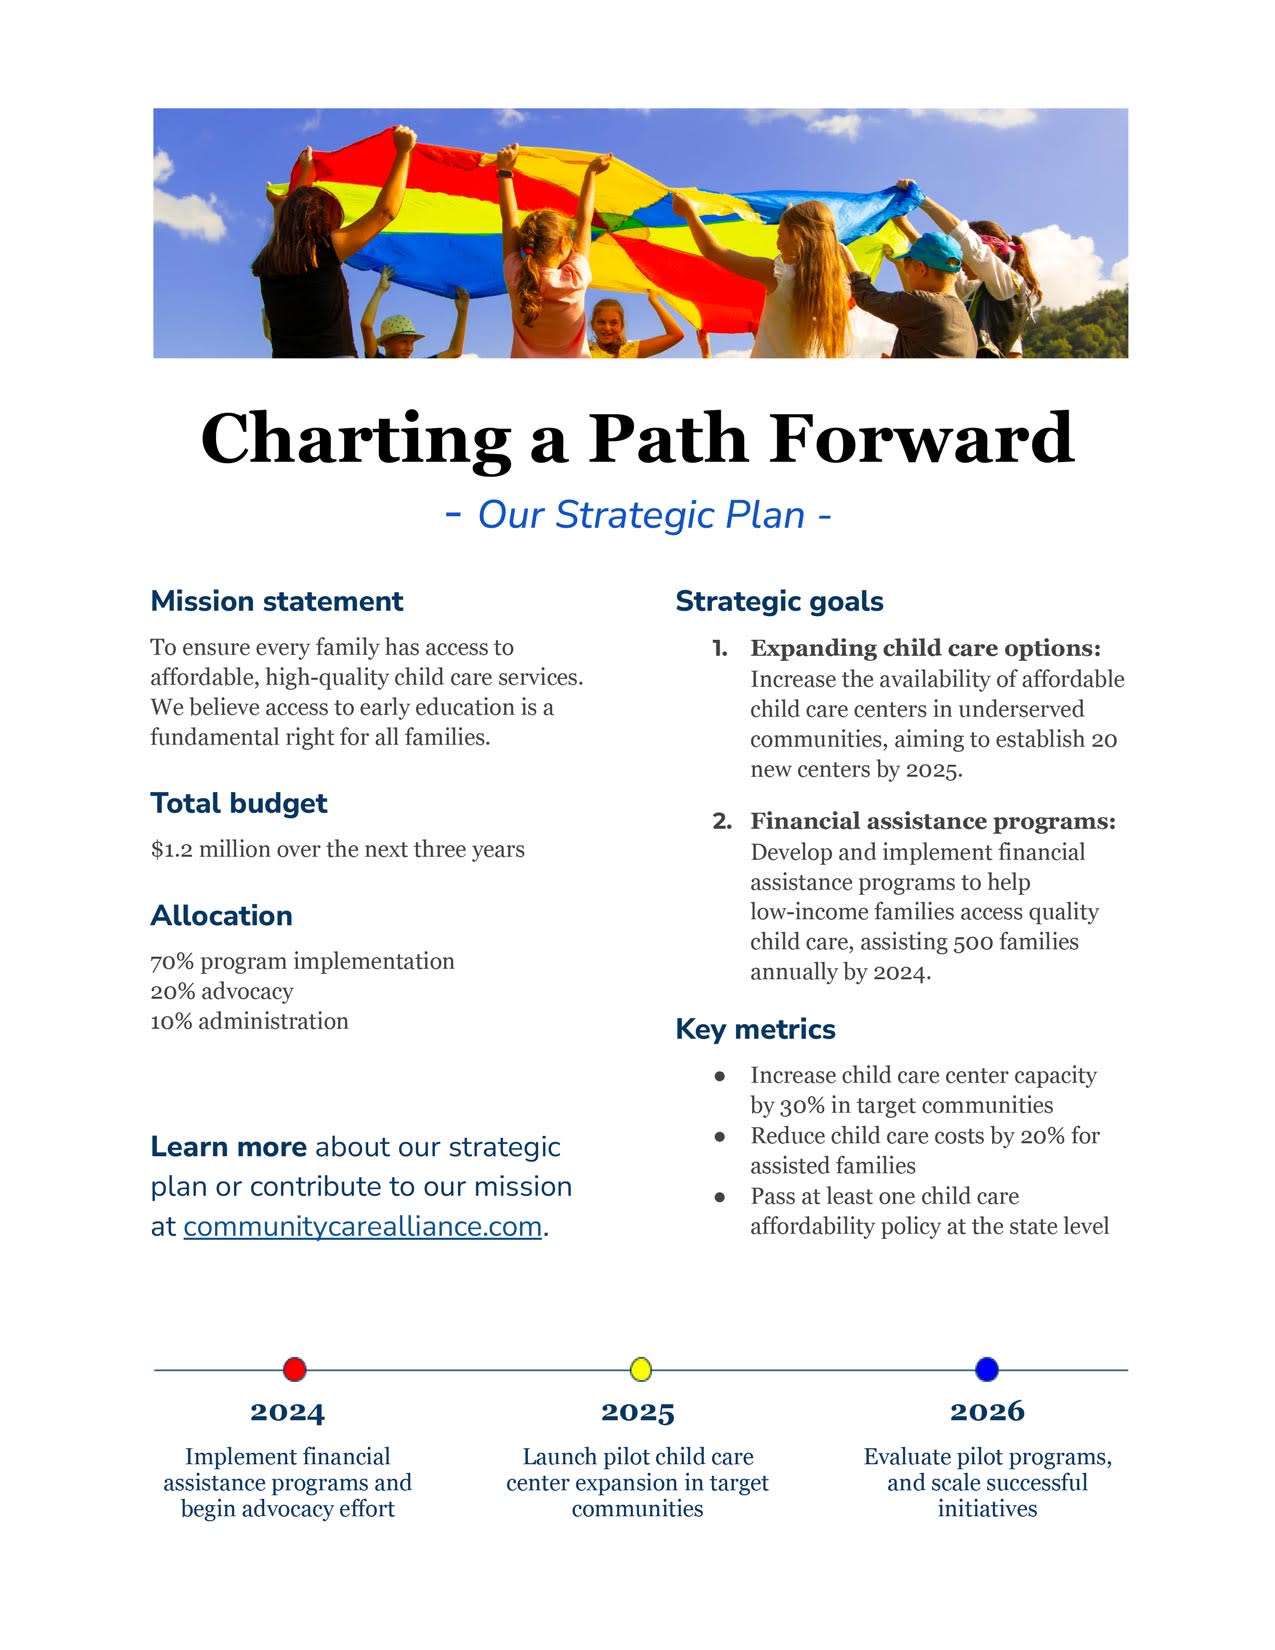 Example of a strategic plan one-pager including goals, key metrics, timeline, budget and more